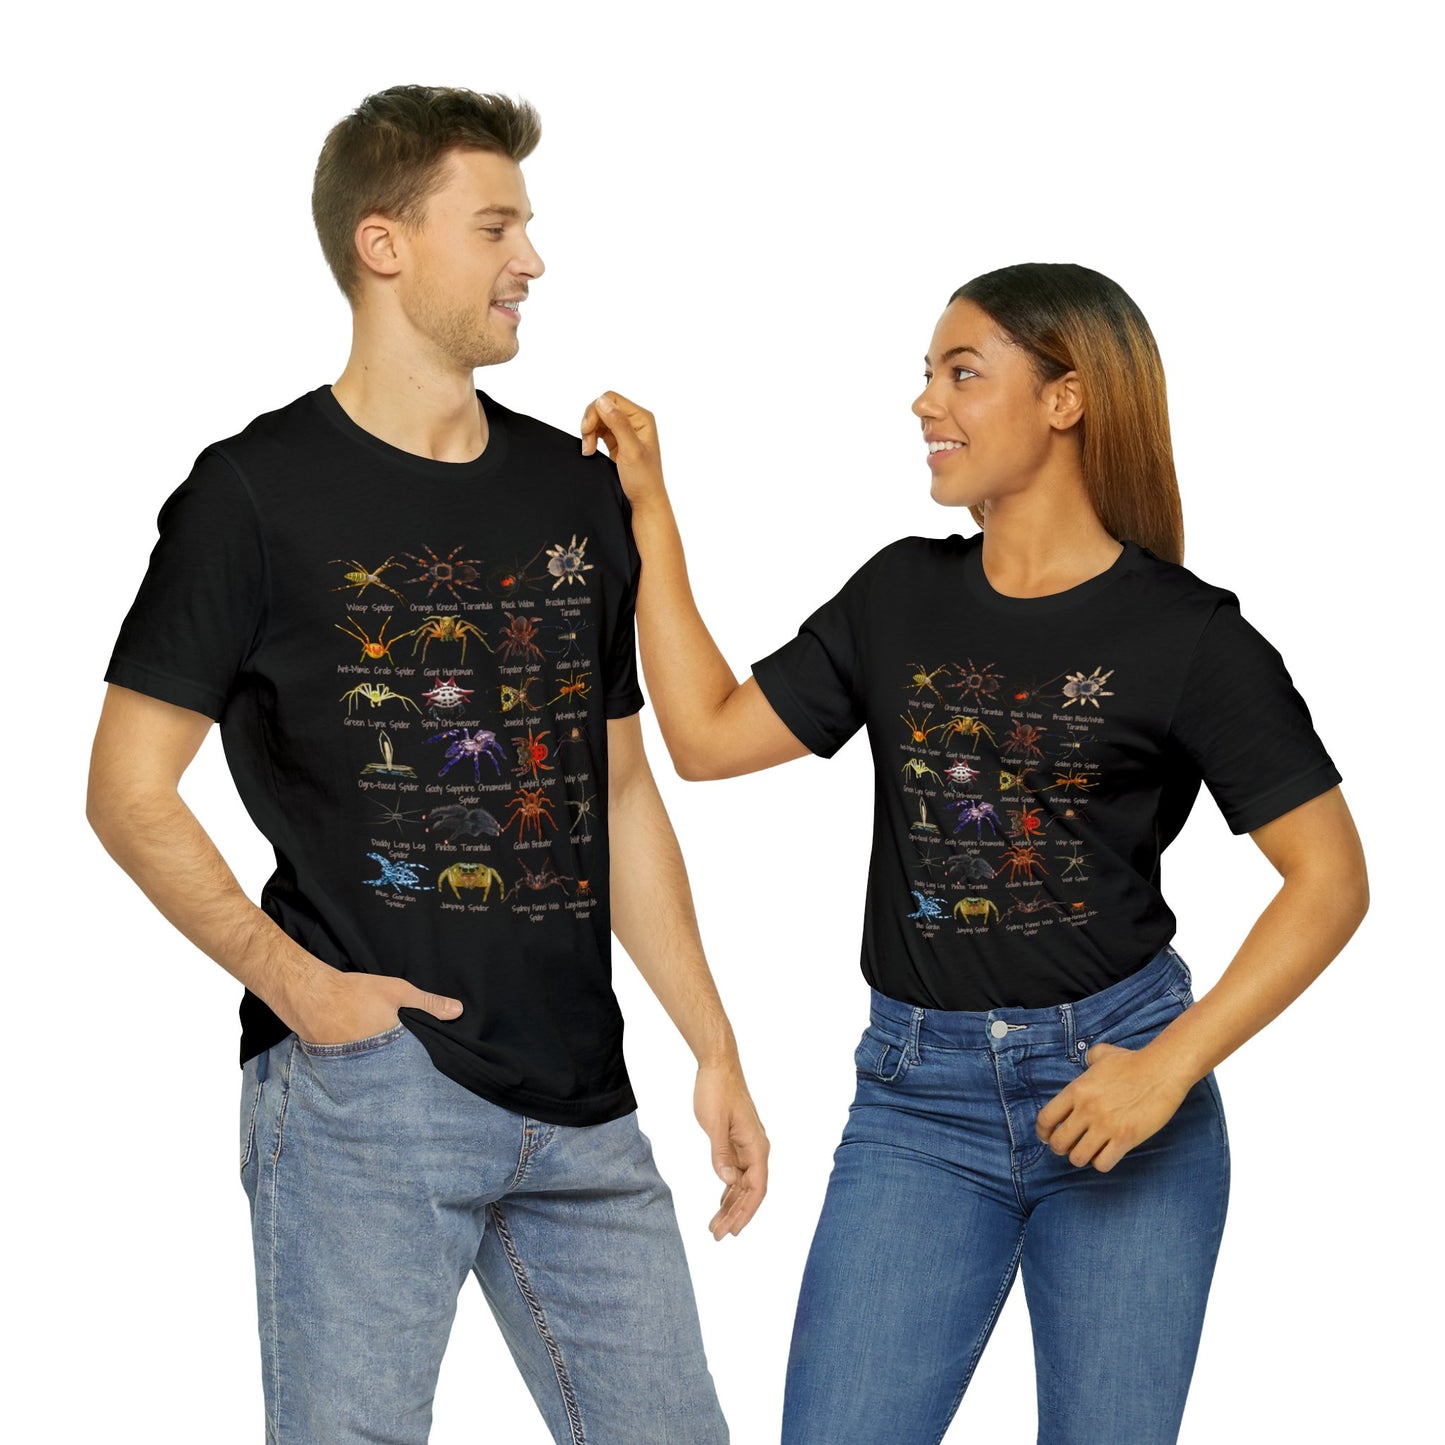 Stupendous Spiders T-shirt with 24 unique spiders